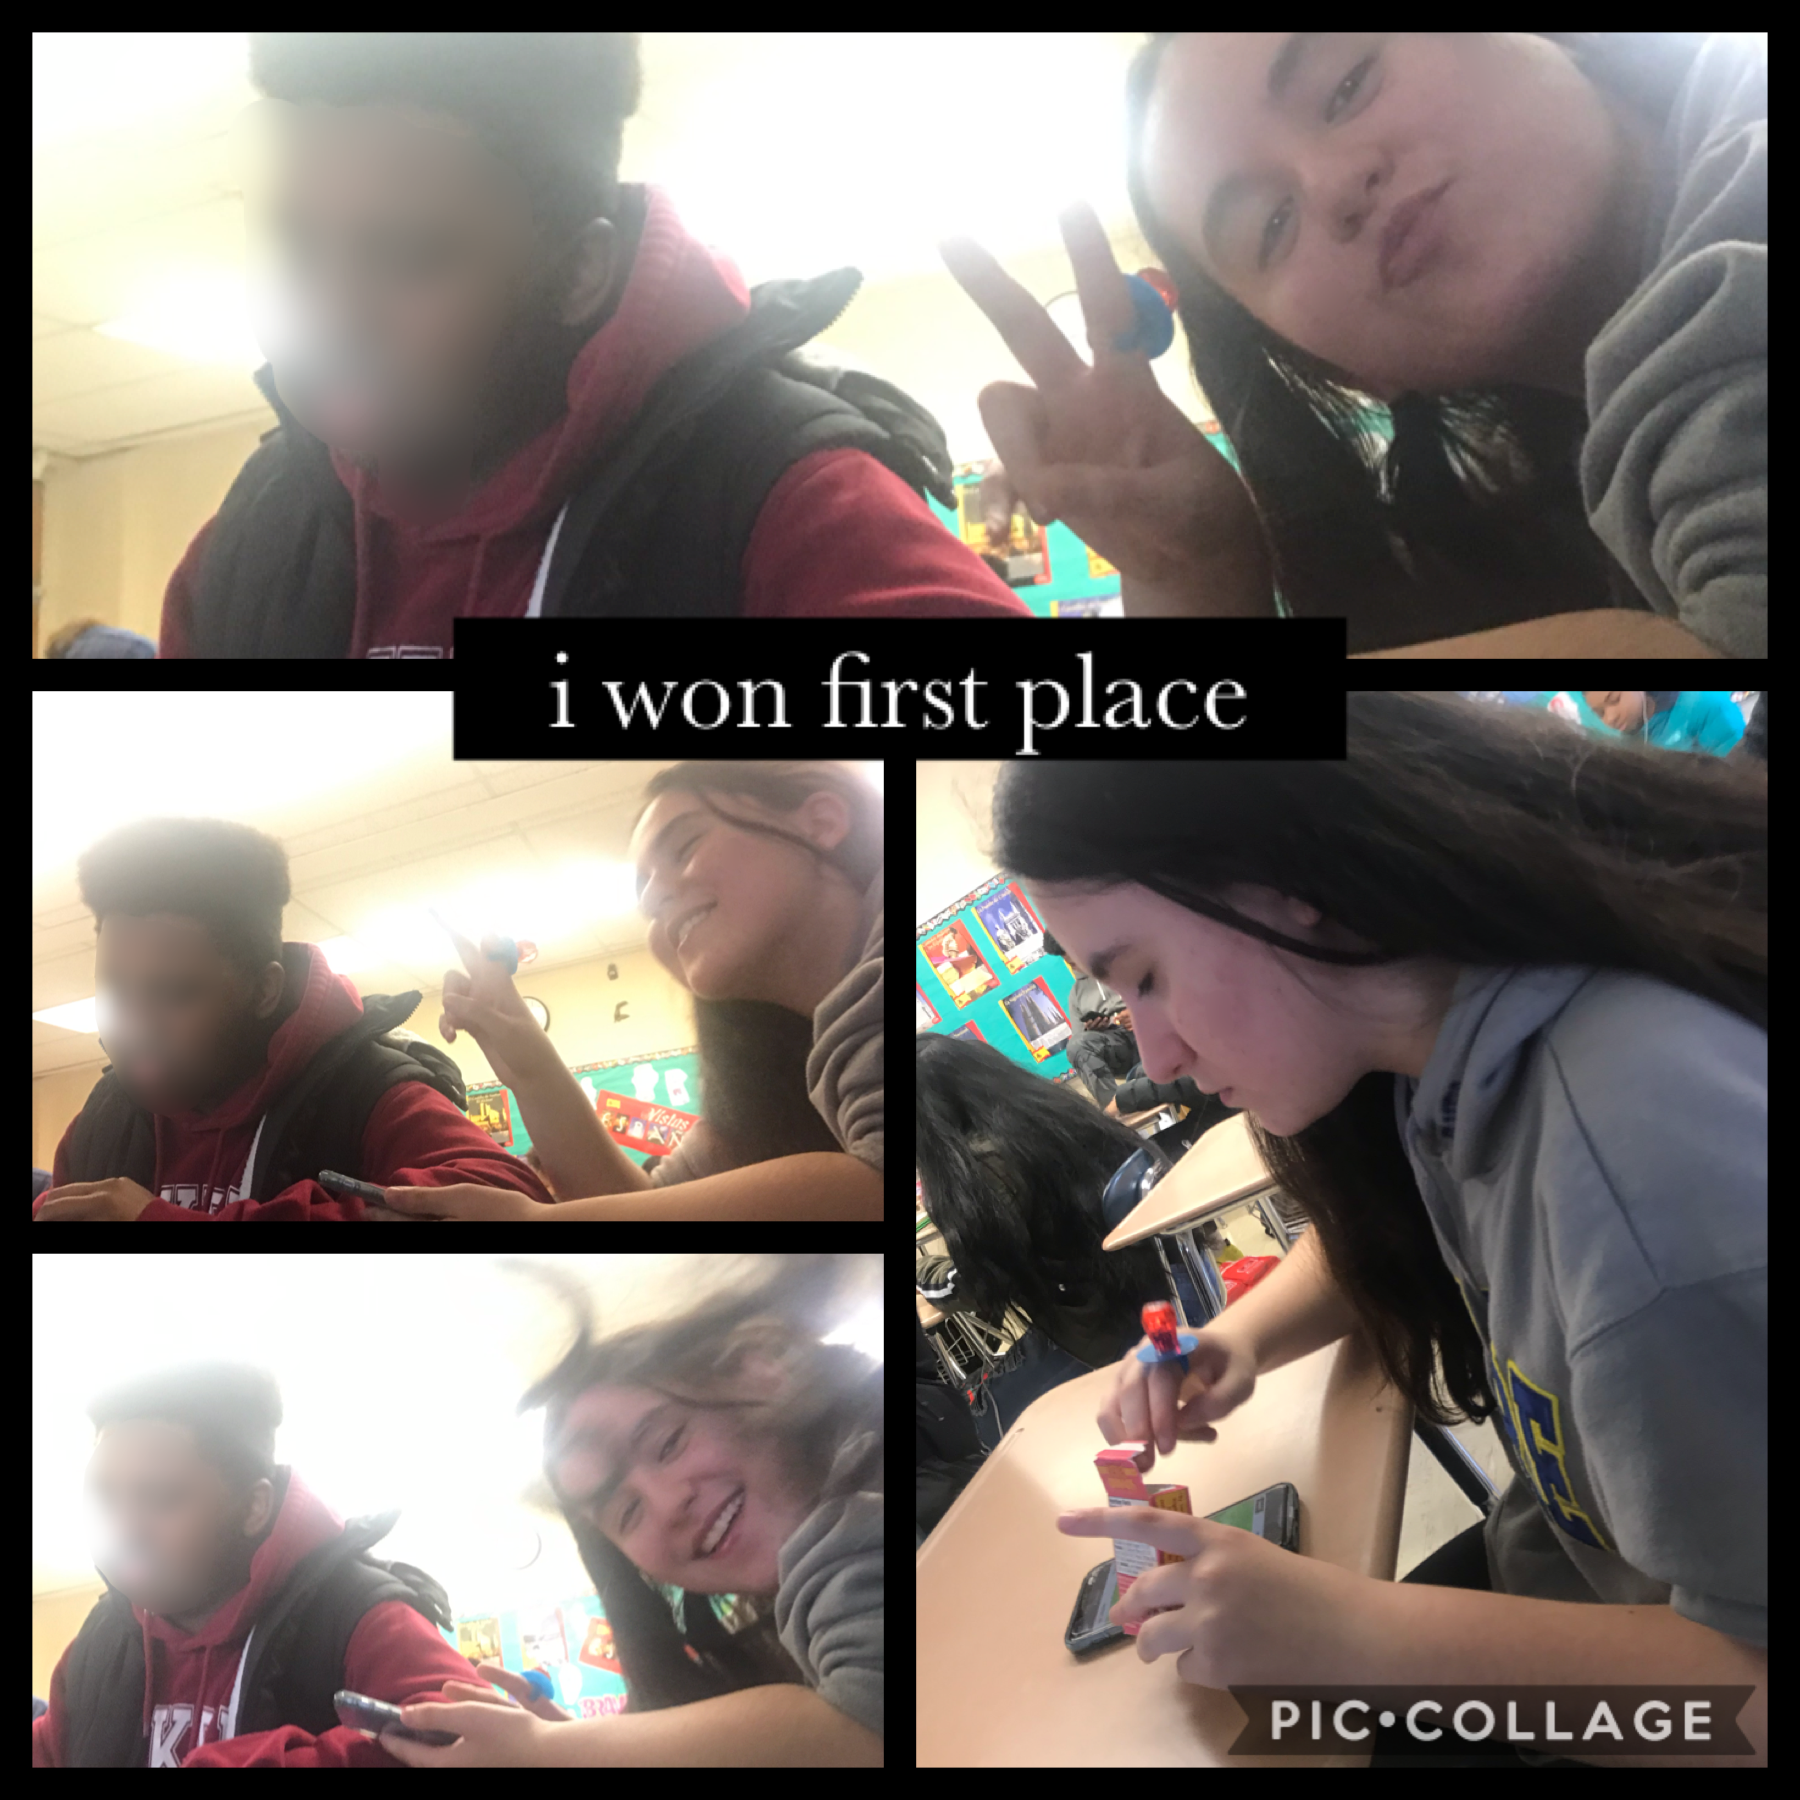 i look like a twelve year old boy,
but besides that last week i won first place in kahoot for spanish class.
I ALWAYS win kahoot. especially in spanish class. 
and the guy in the photo (blurred out face for obvious reasons) his strategy was to pick the sh